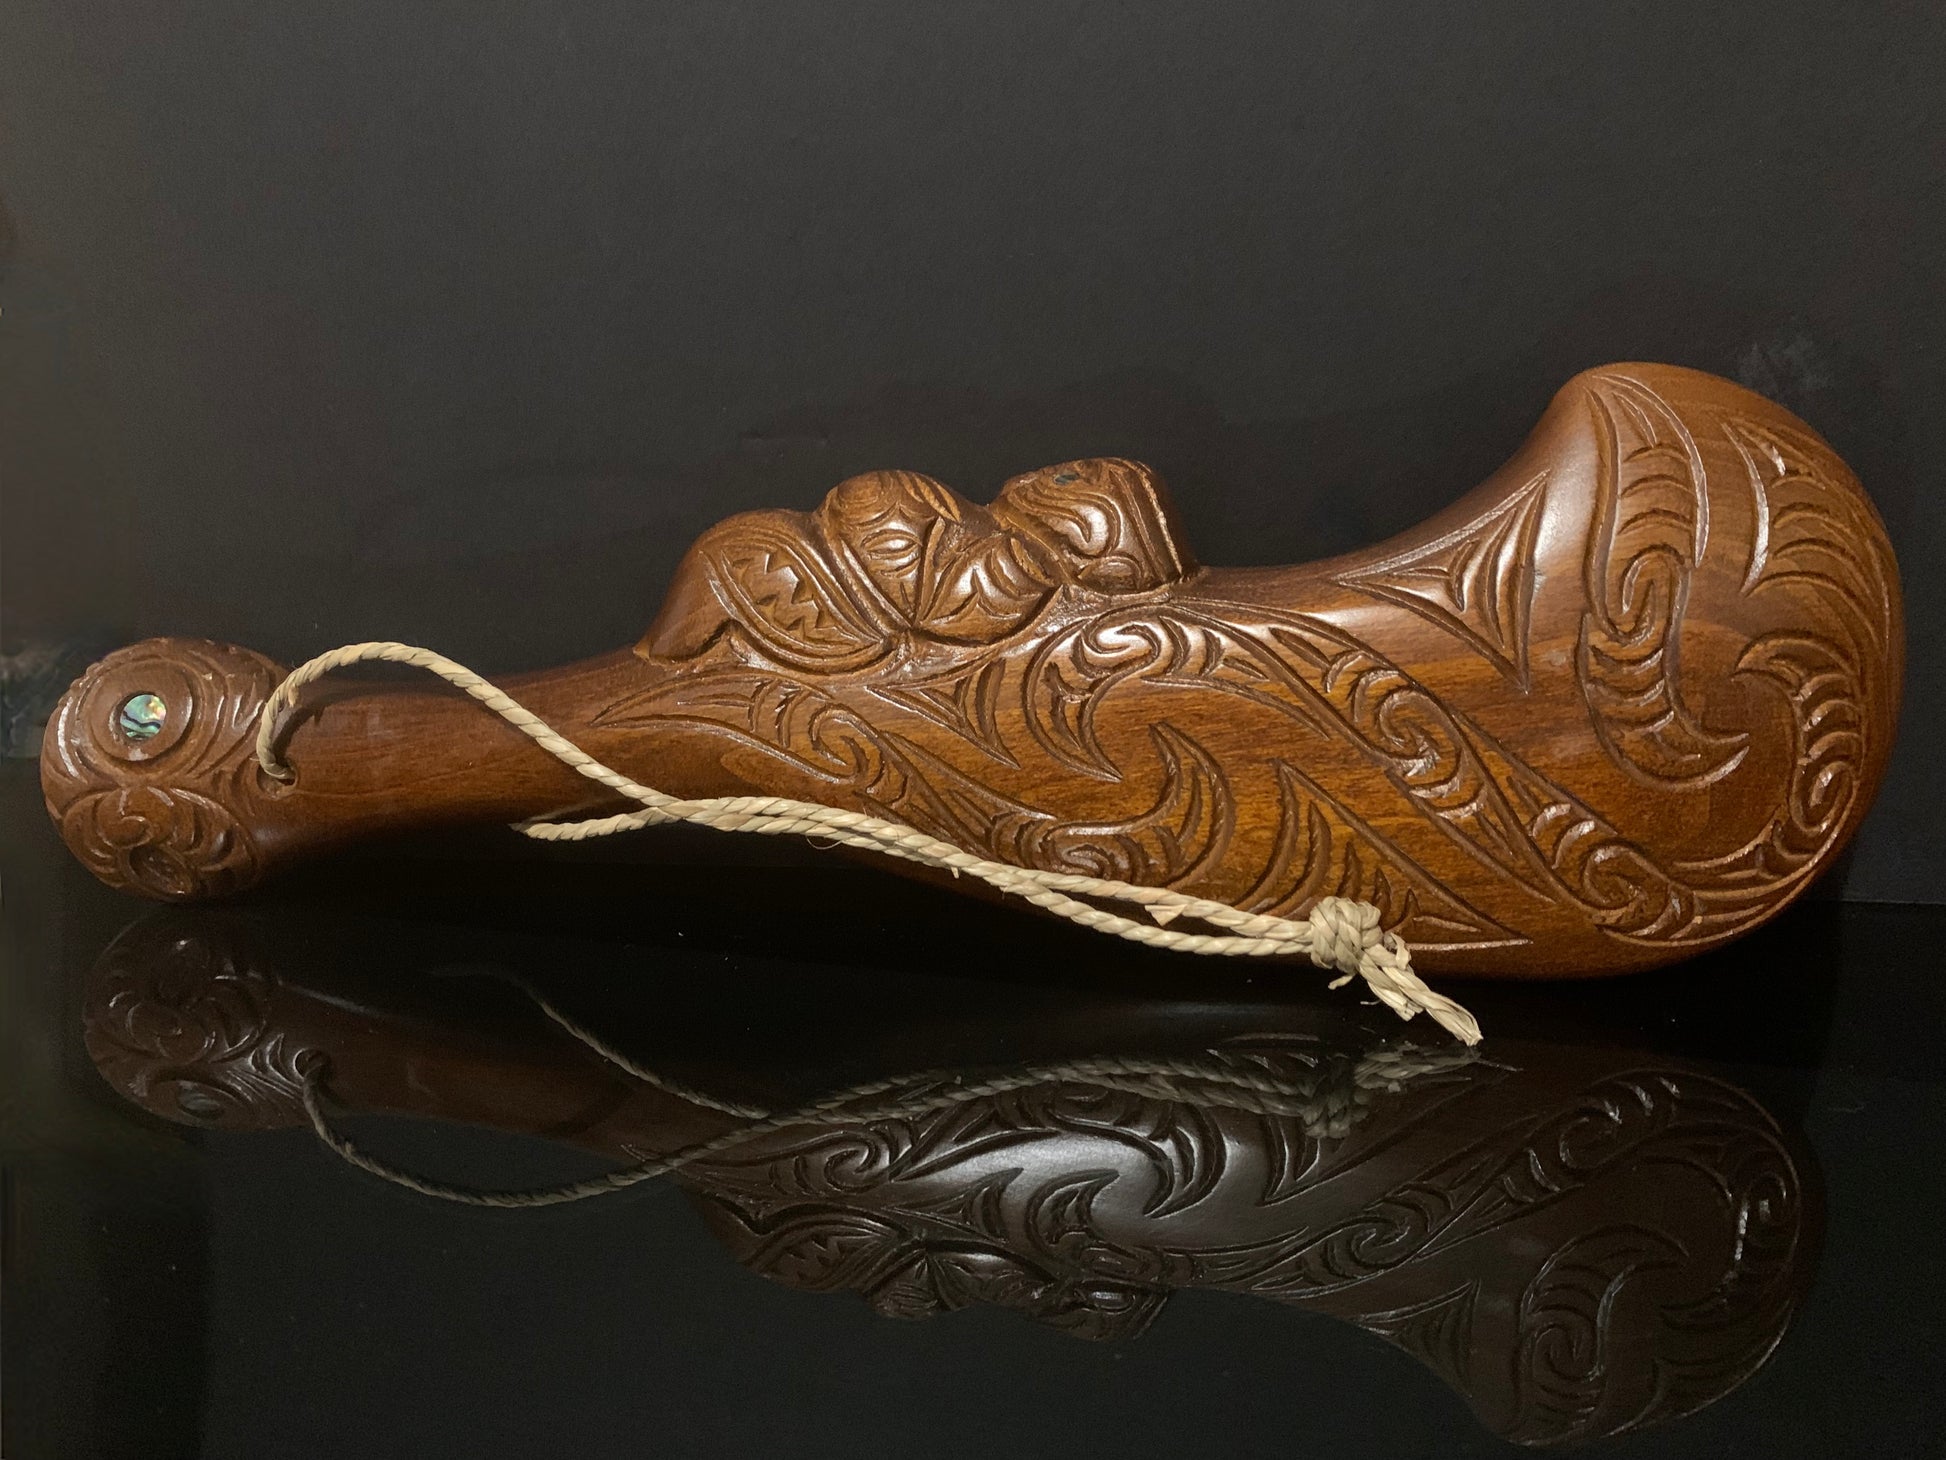 large Maori wood wahaika weapon carved in New Zealand and available from Silver Fern Gallery